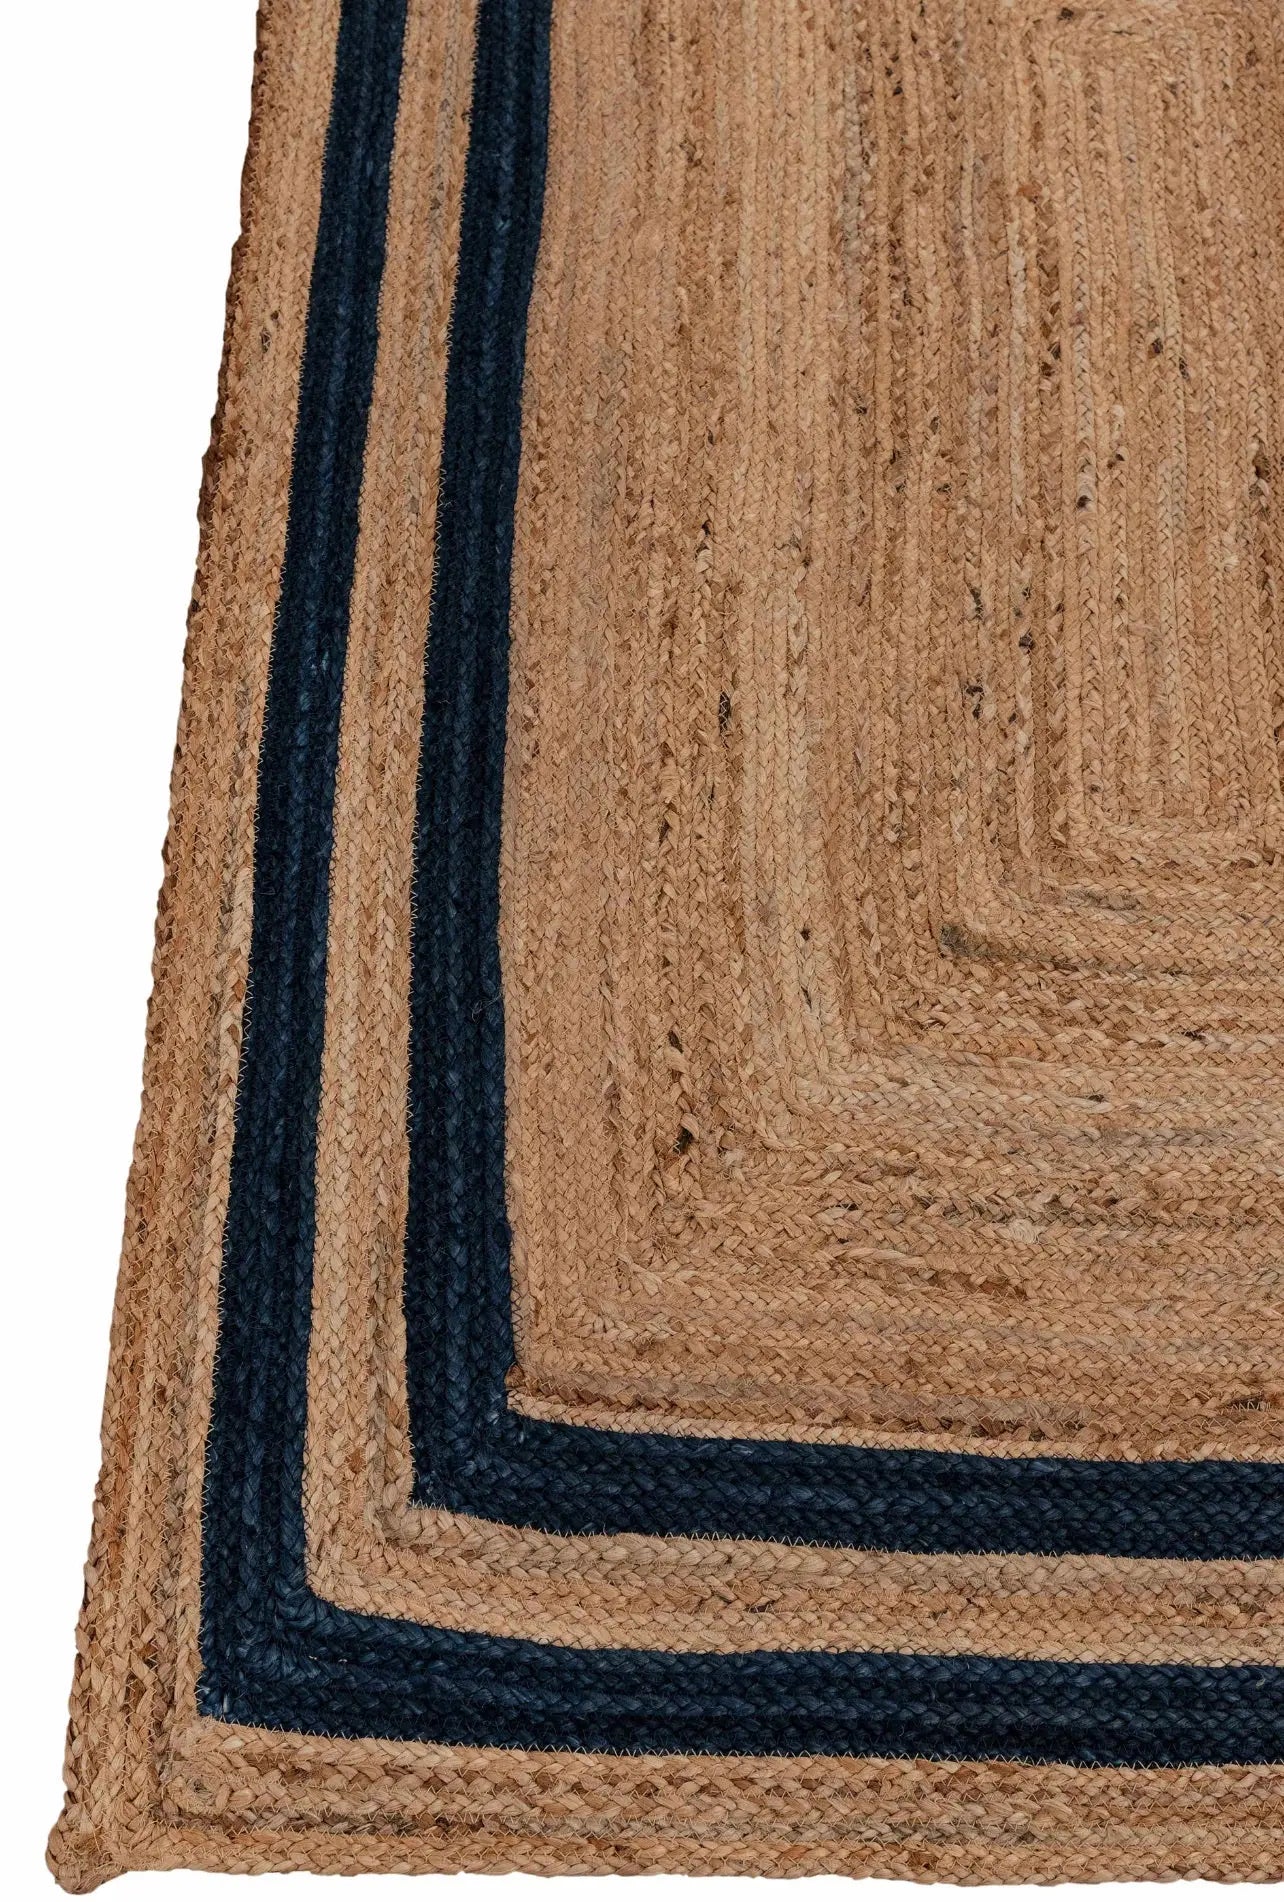 Rectangle Jute with Navy Border - Milagro Collective